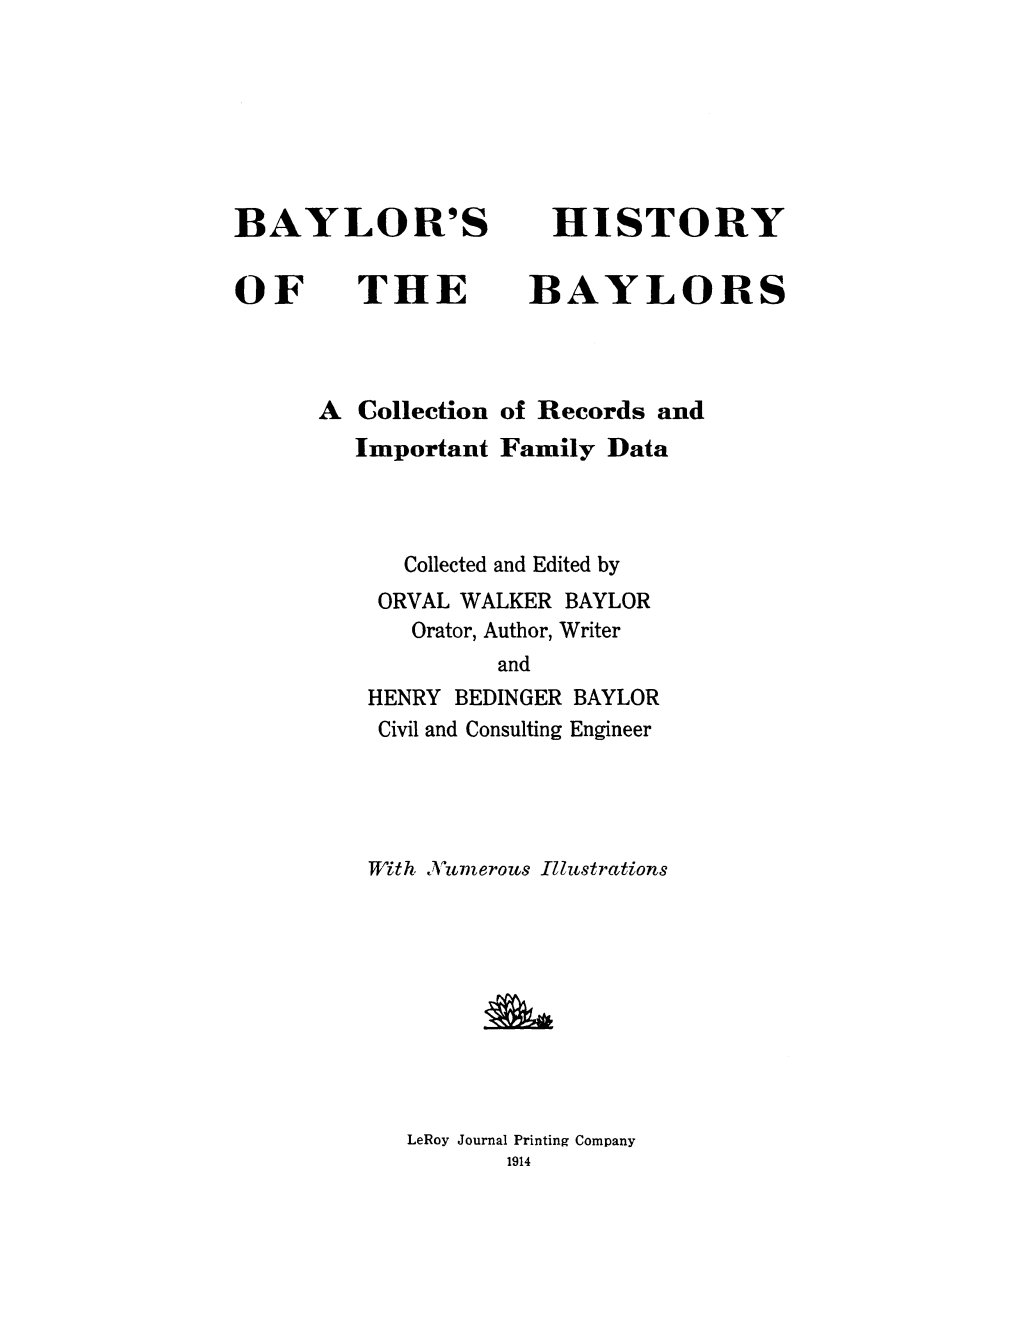 Baylor's History of the Ba Ylors